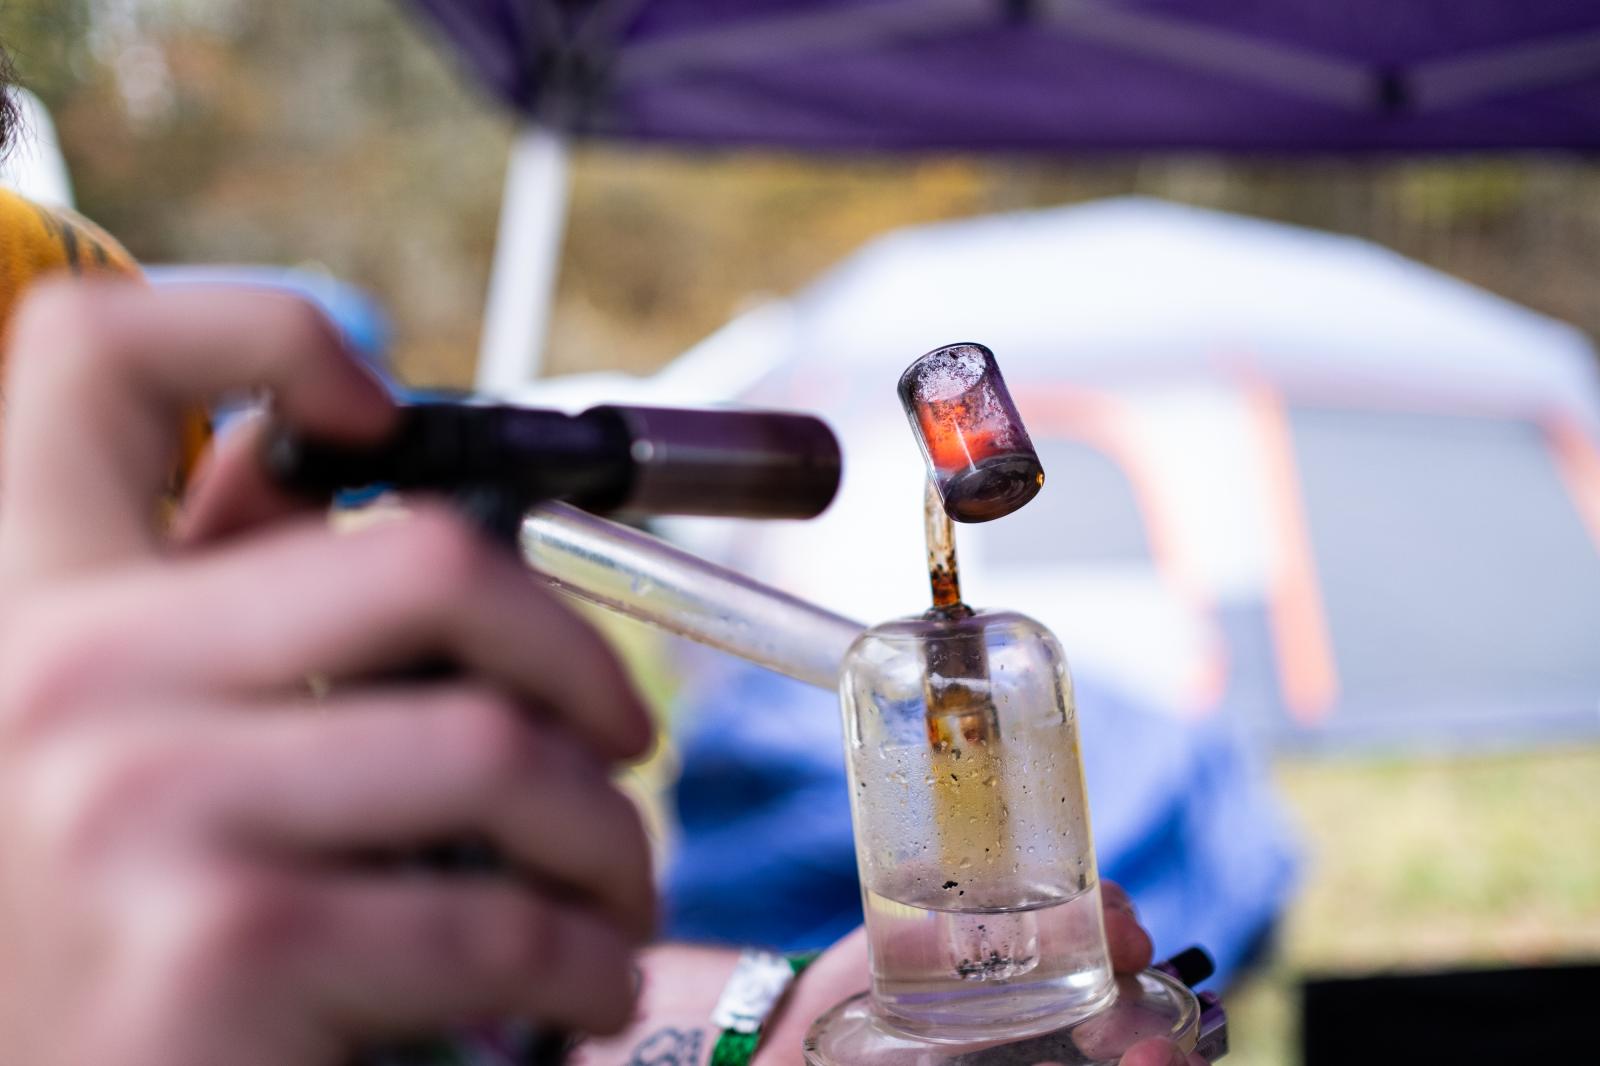 A vendor at the Hemp Festival cleans a dab rig used for vaporizing cannabis concentrates.